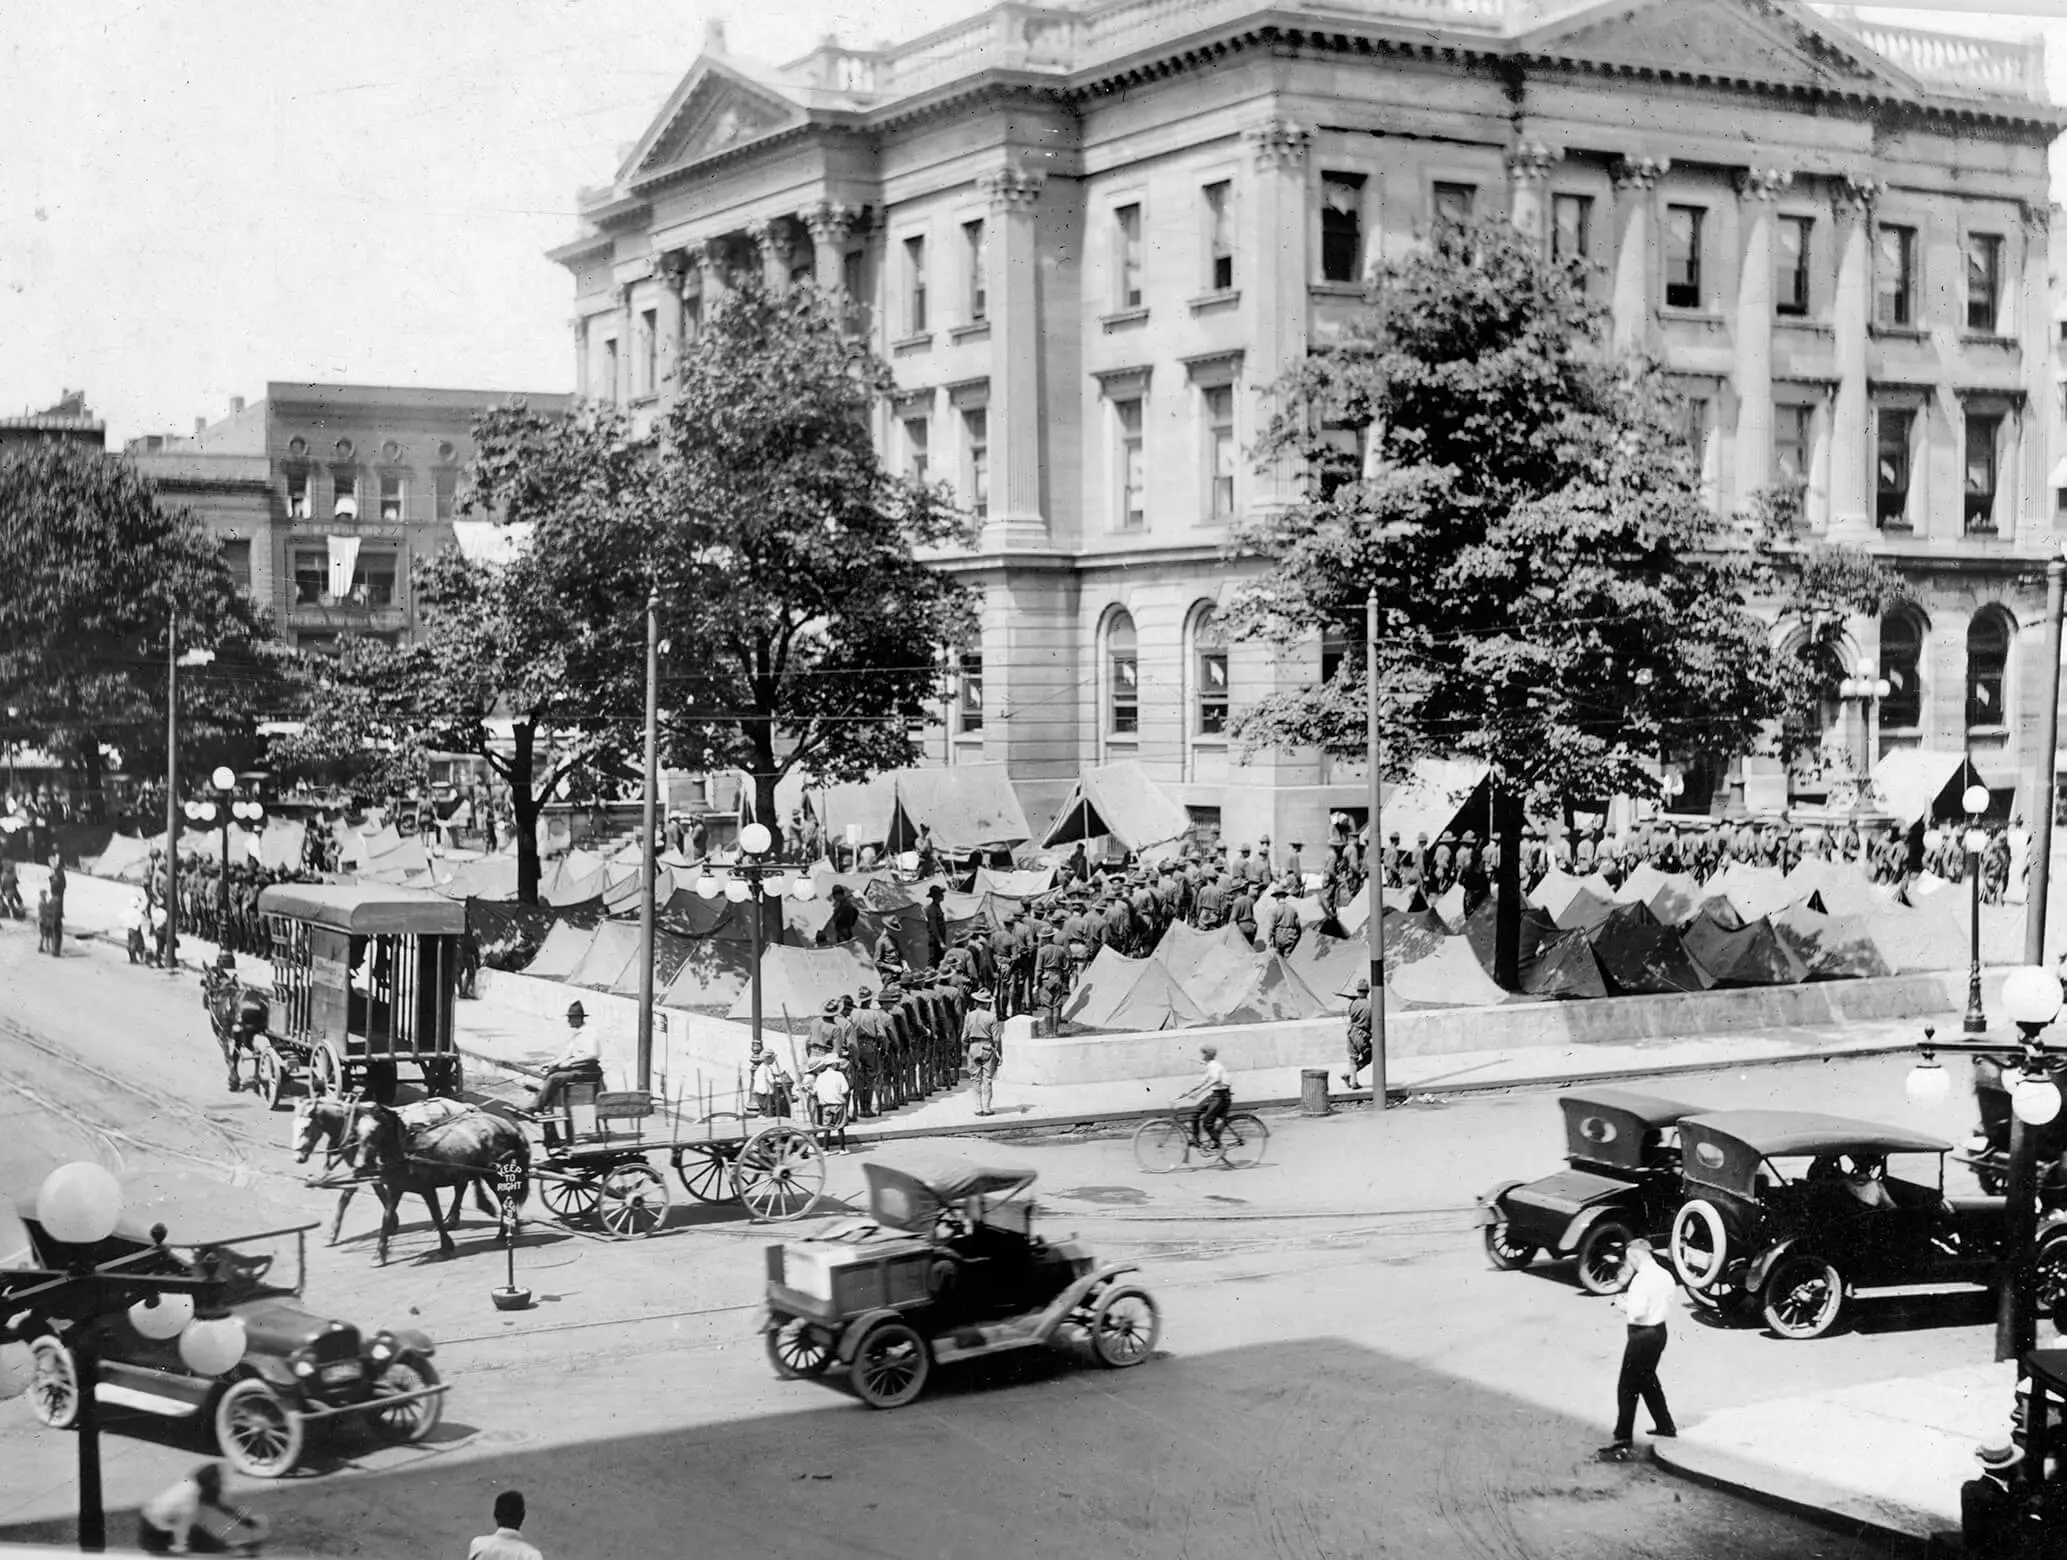 A three-story courthouse building with tents on the lawn out front. A long line of men in uniform extends from the building